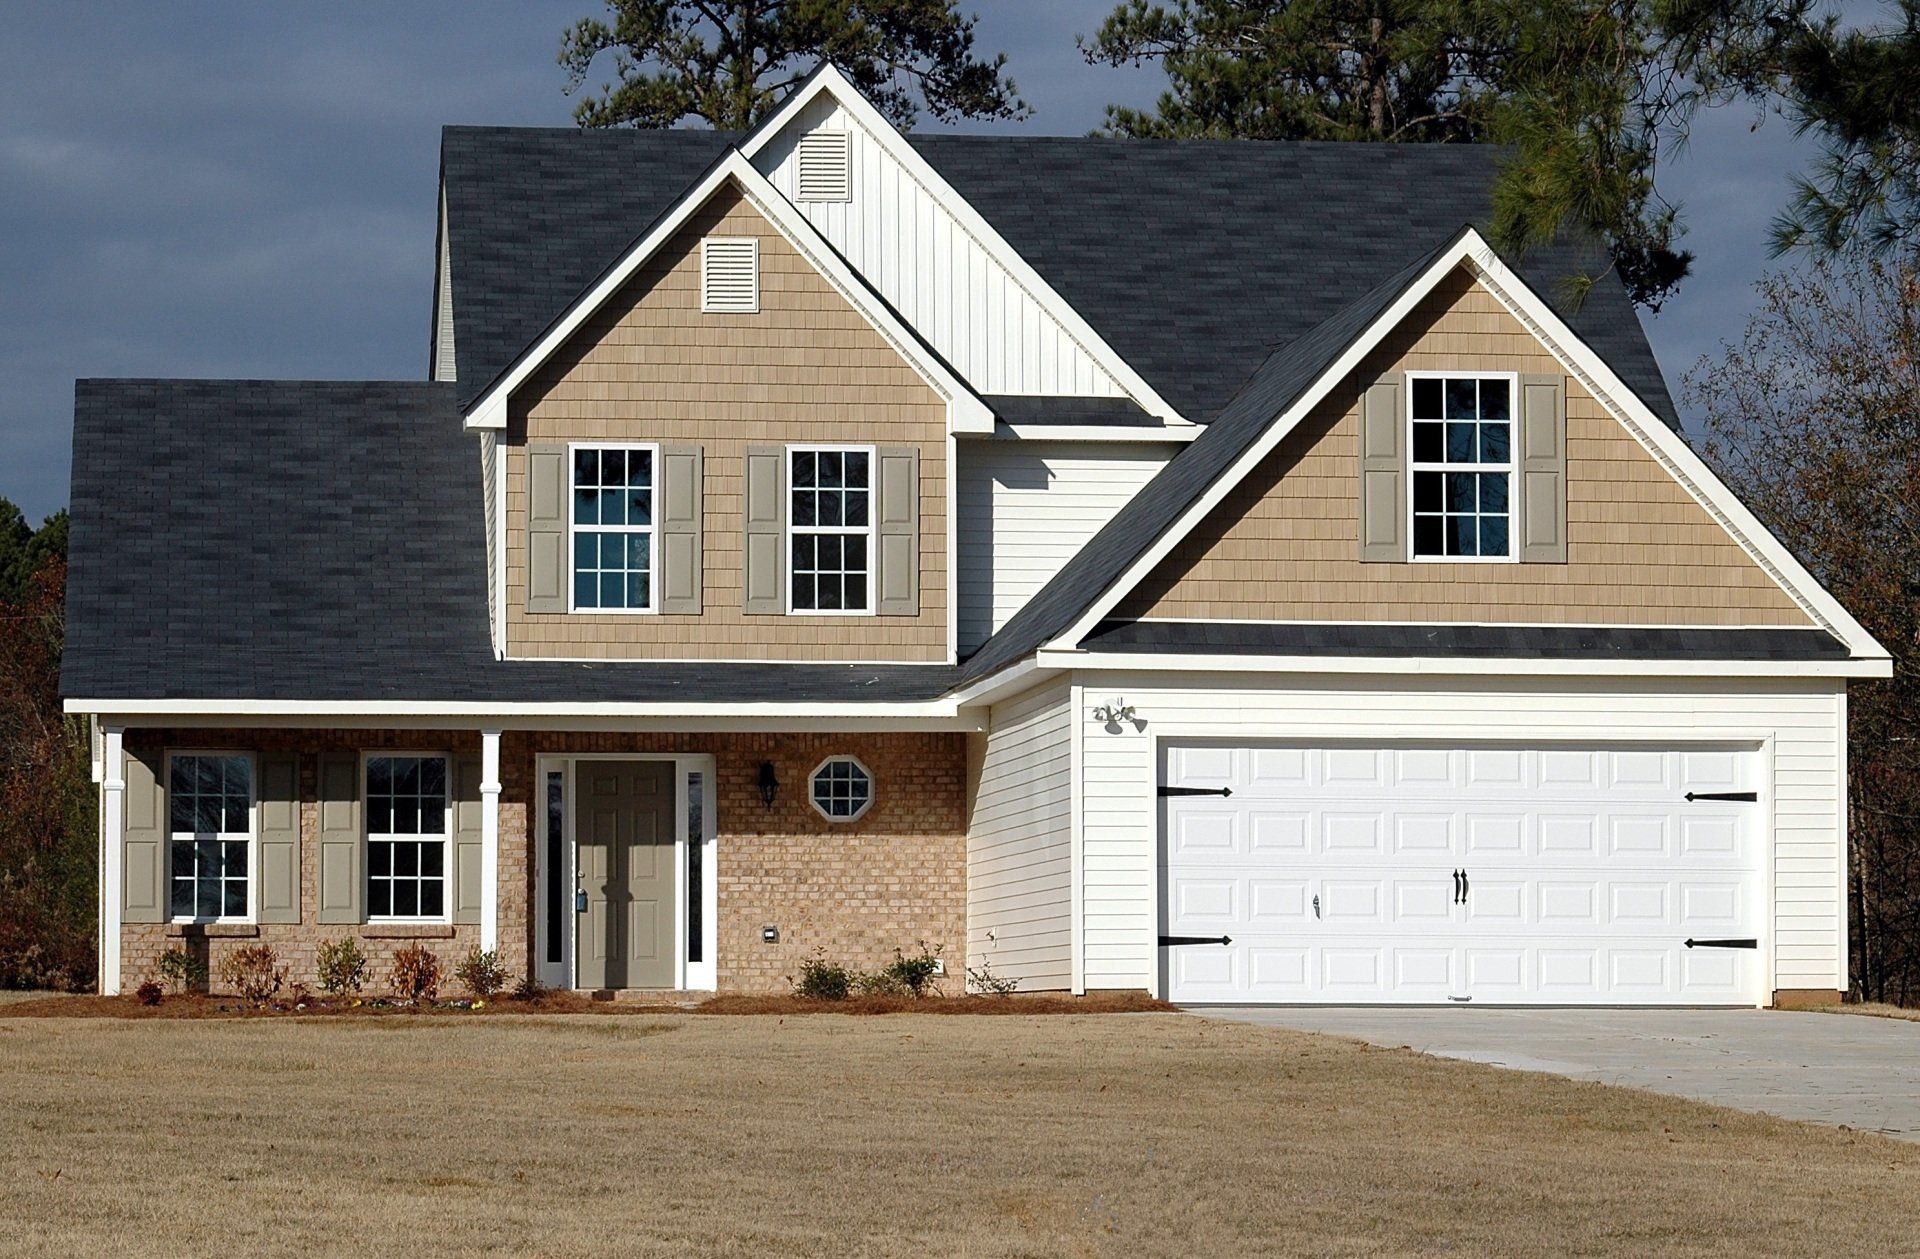 Roofing services in Athens, GA